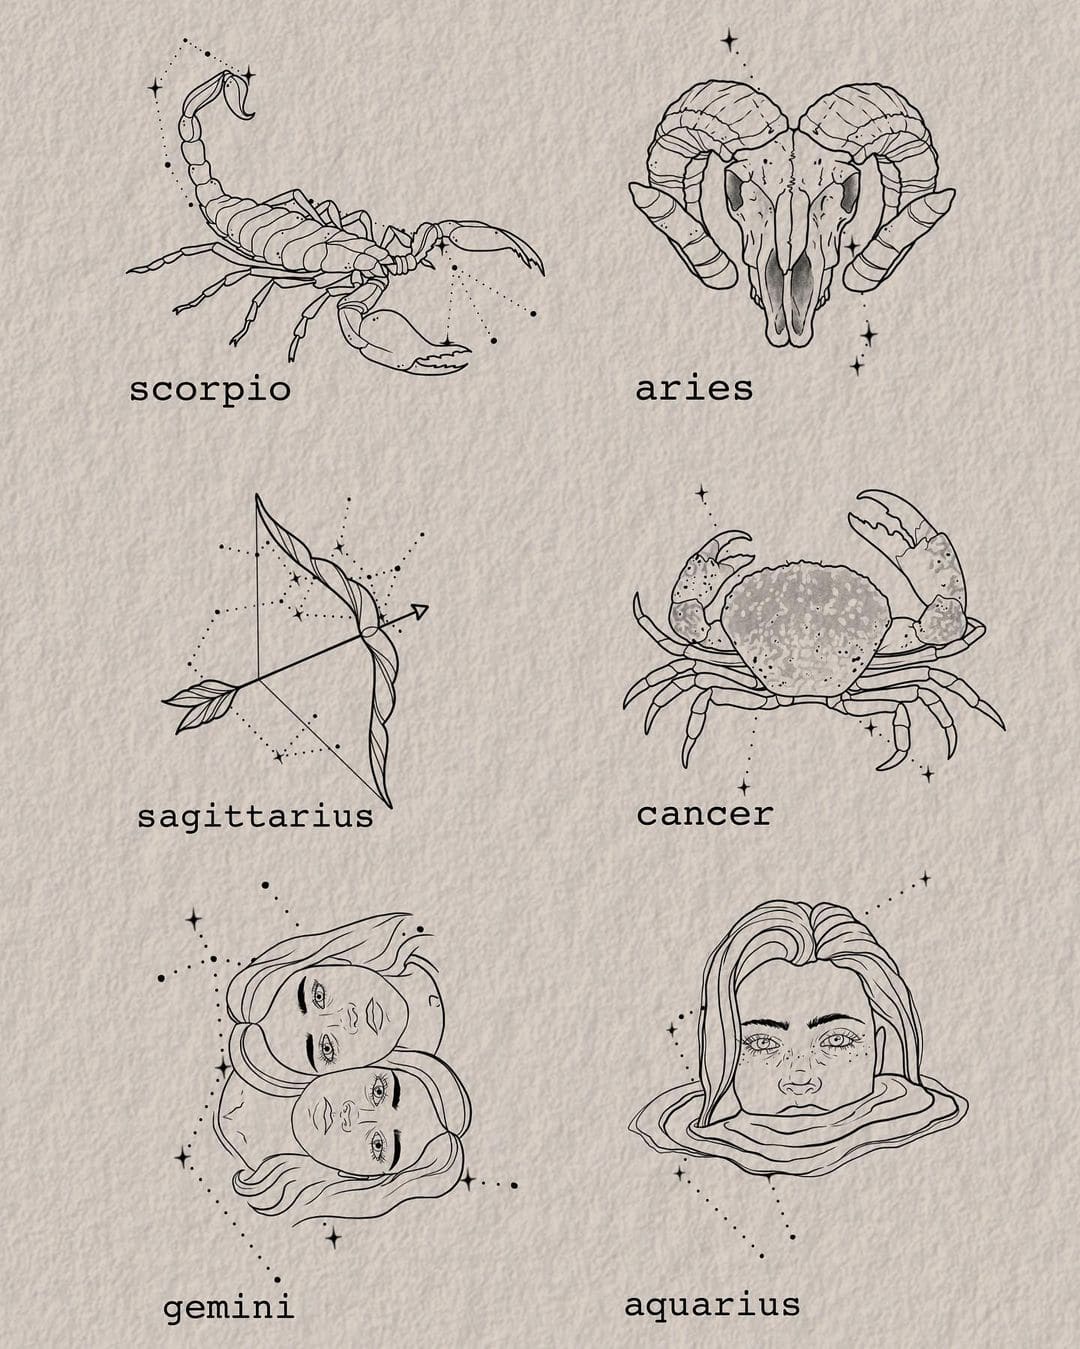 10 Best Scorpio Tattoos Full of Meaning and Ideas